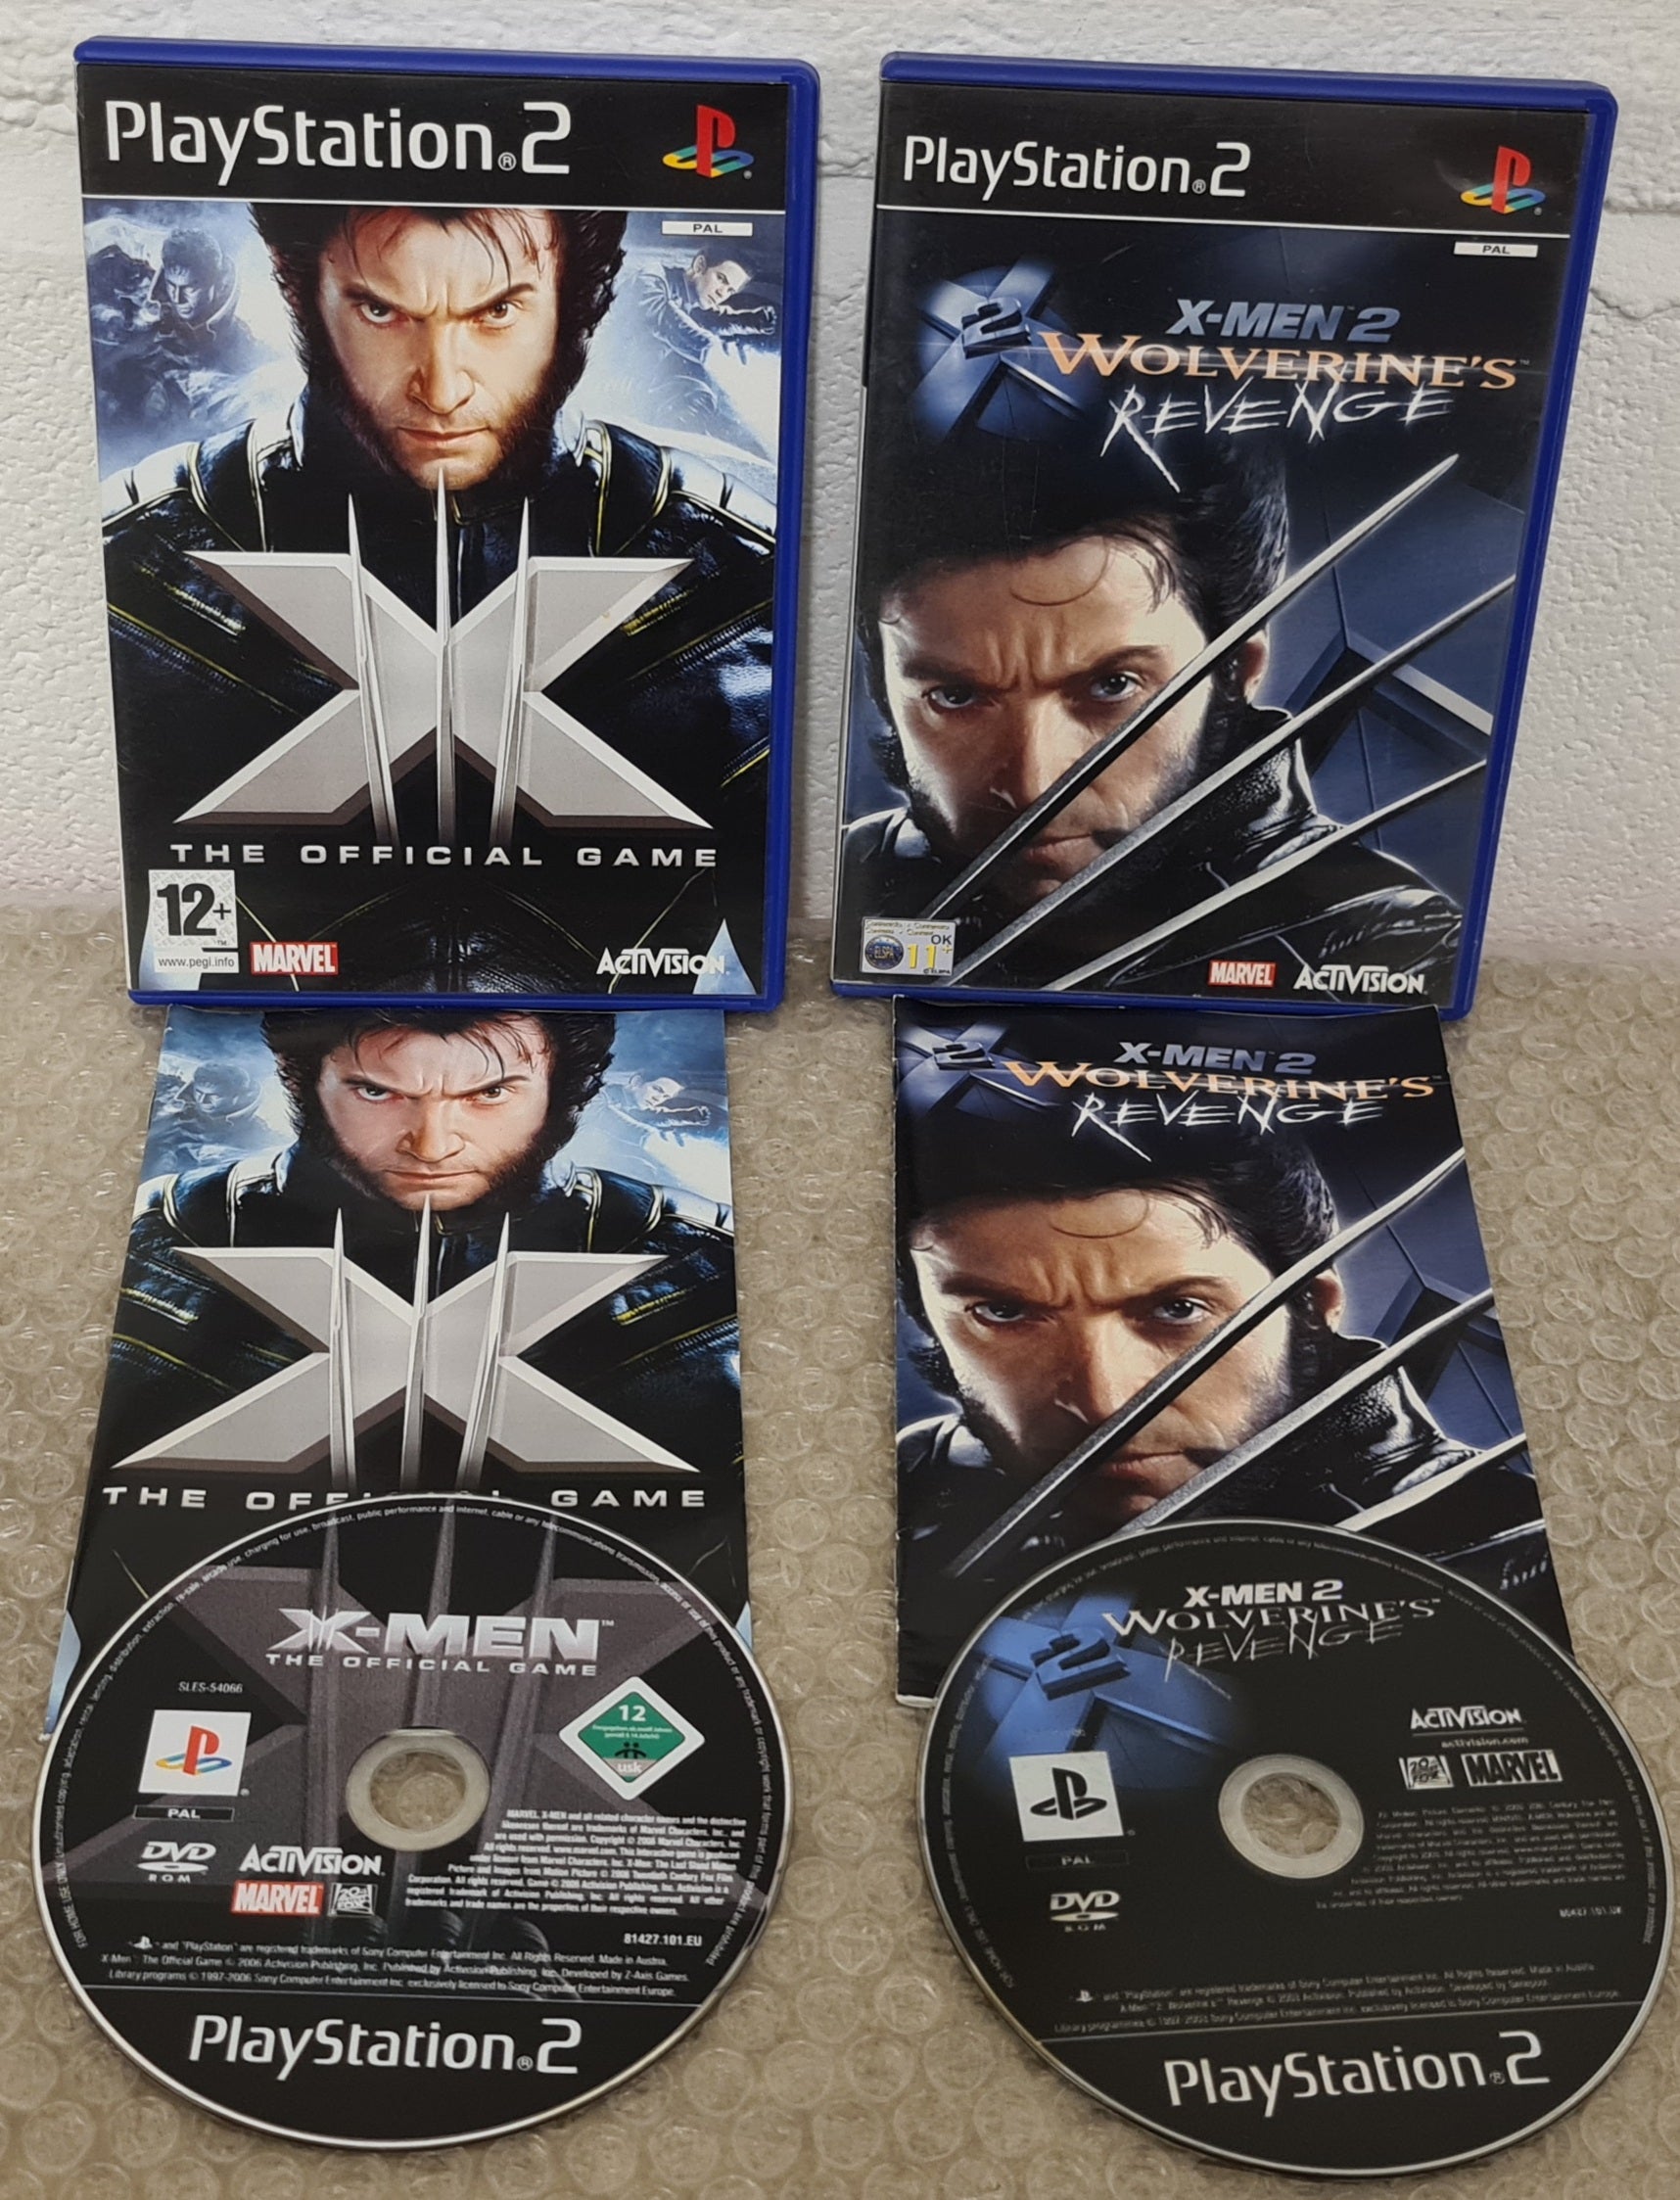 X-Men - The Official Game [SLUS 21107] (Sony Playstation 2) - Box